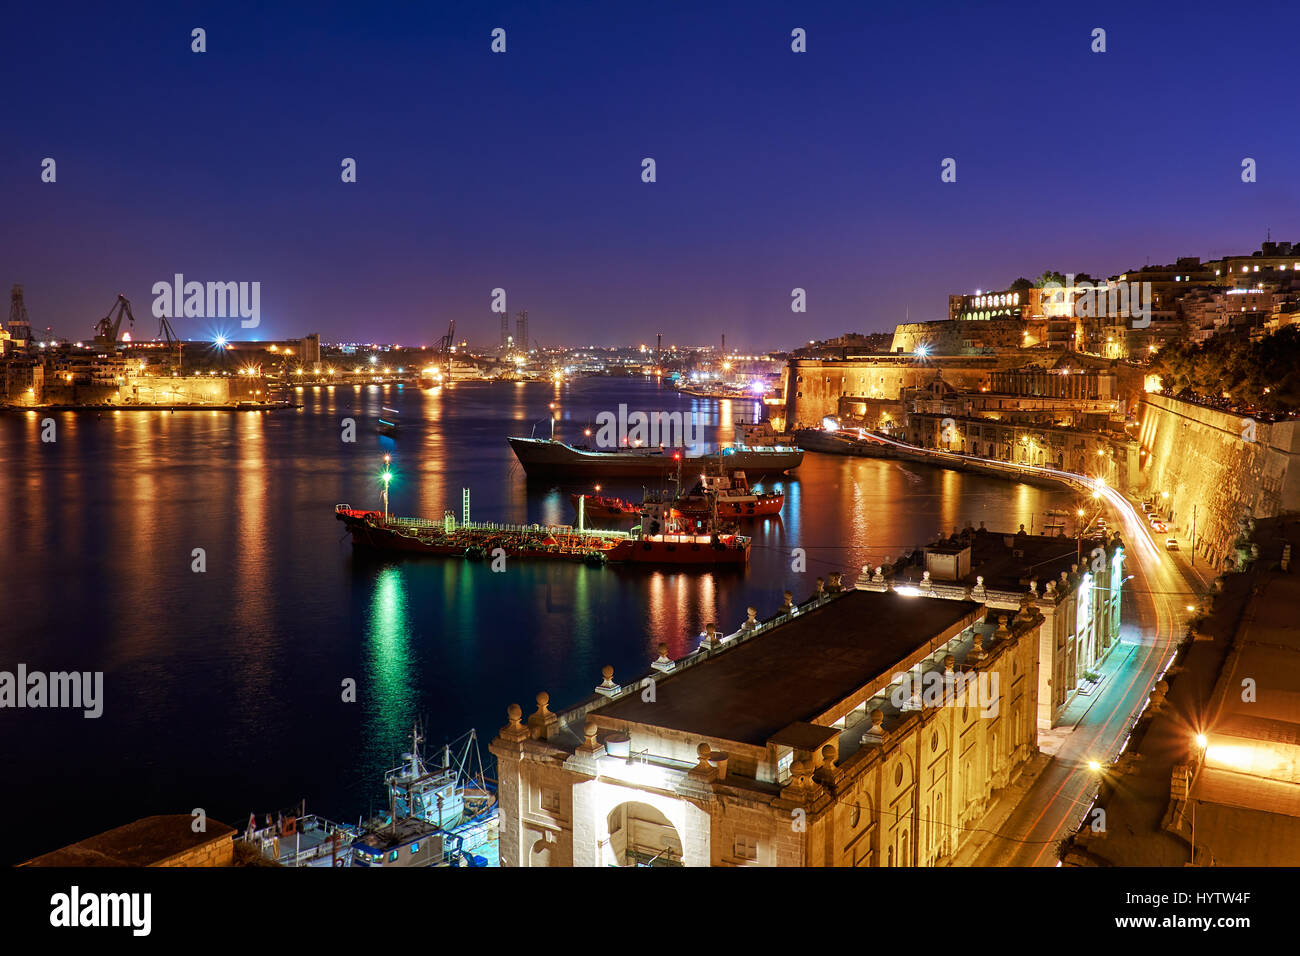 The night view of Grand Harbour with the cargo ships moored near St. Barbara Bastion from the Lower Barrakka Gardens, Valletta. Stock Photo